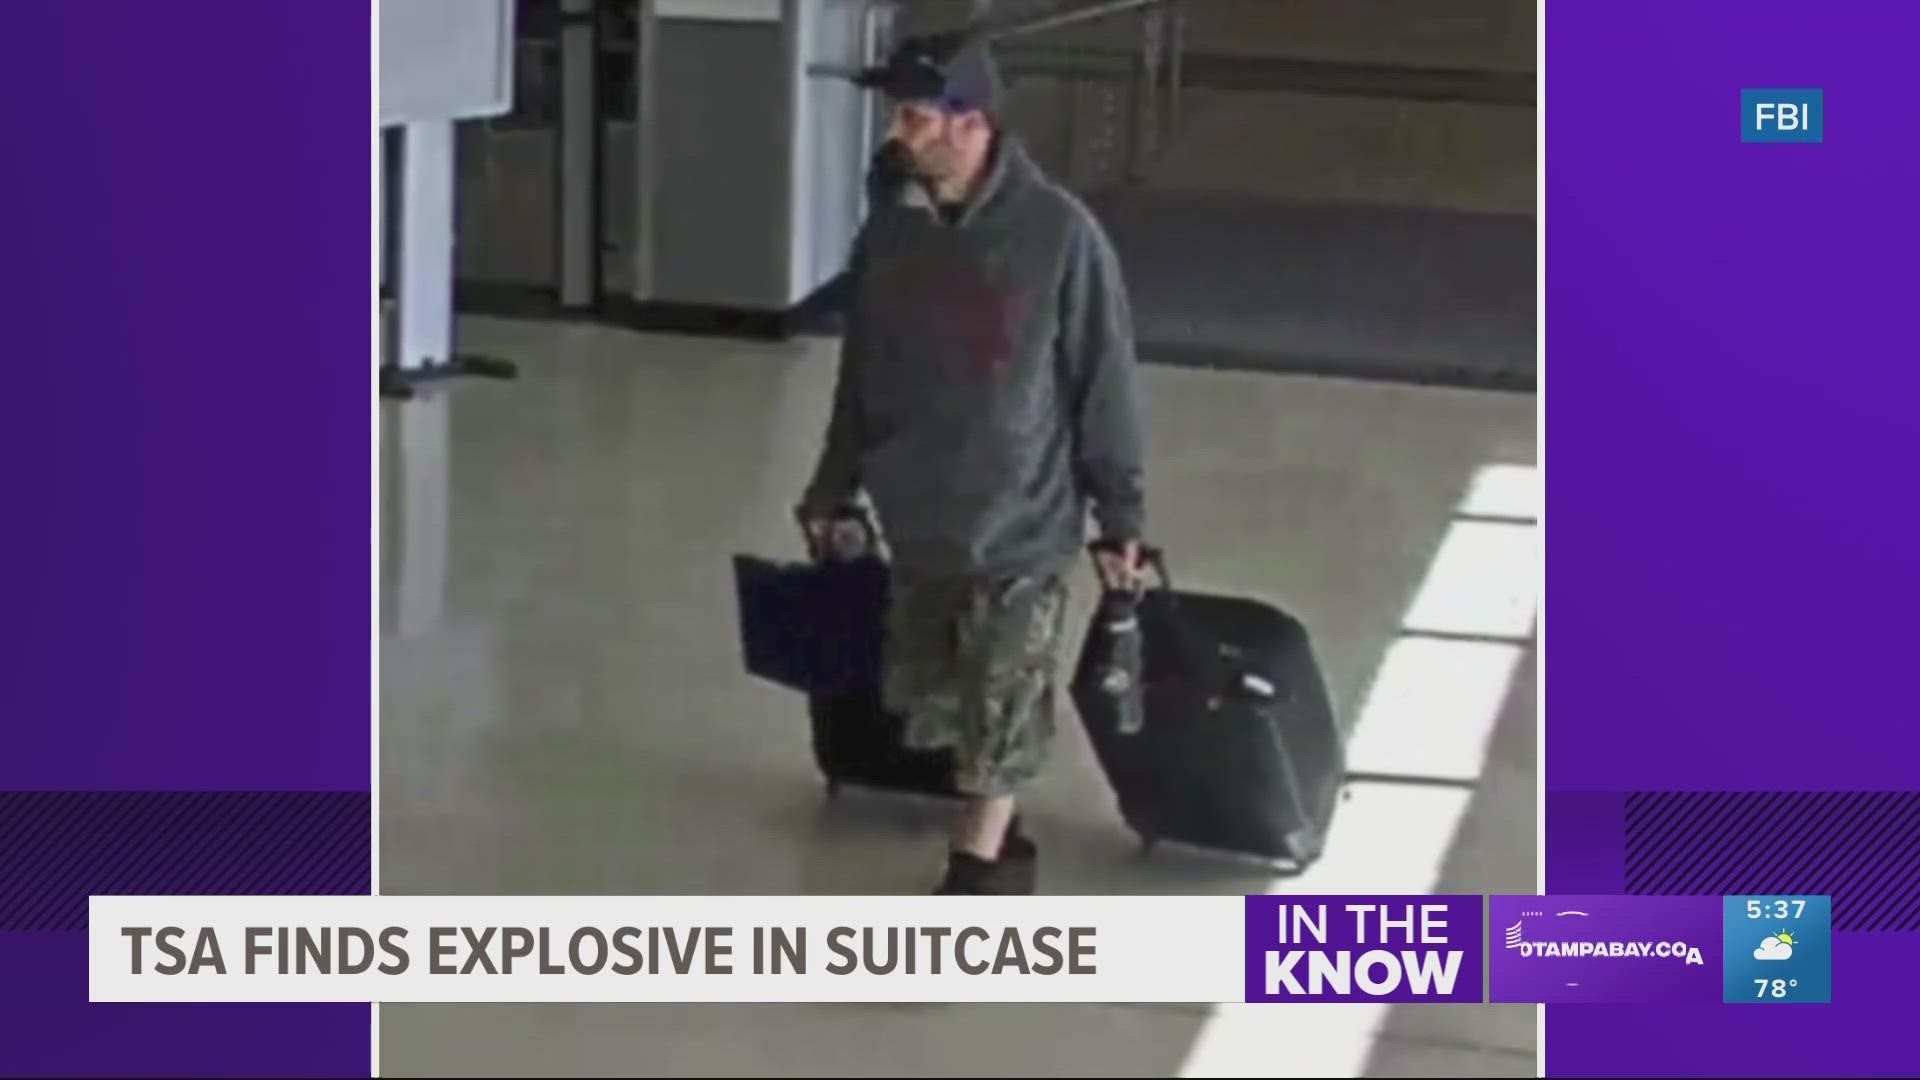 After an alert during security screening, an FBI bomb technician examined the object found in the checked bag and found it contained explosive powders and a fuse.